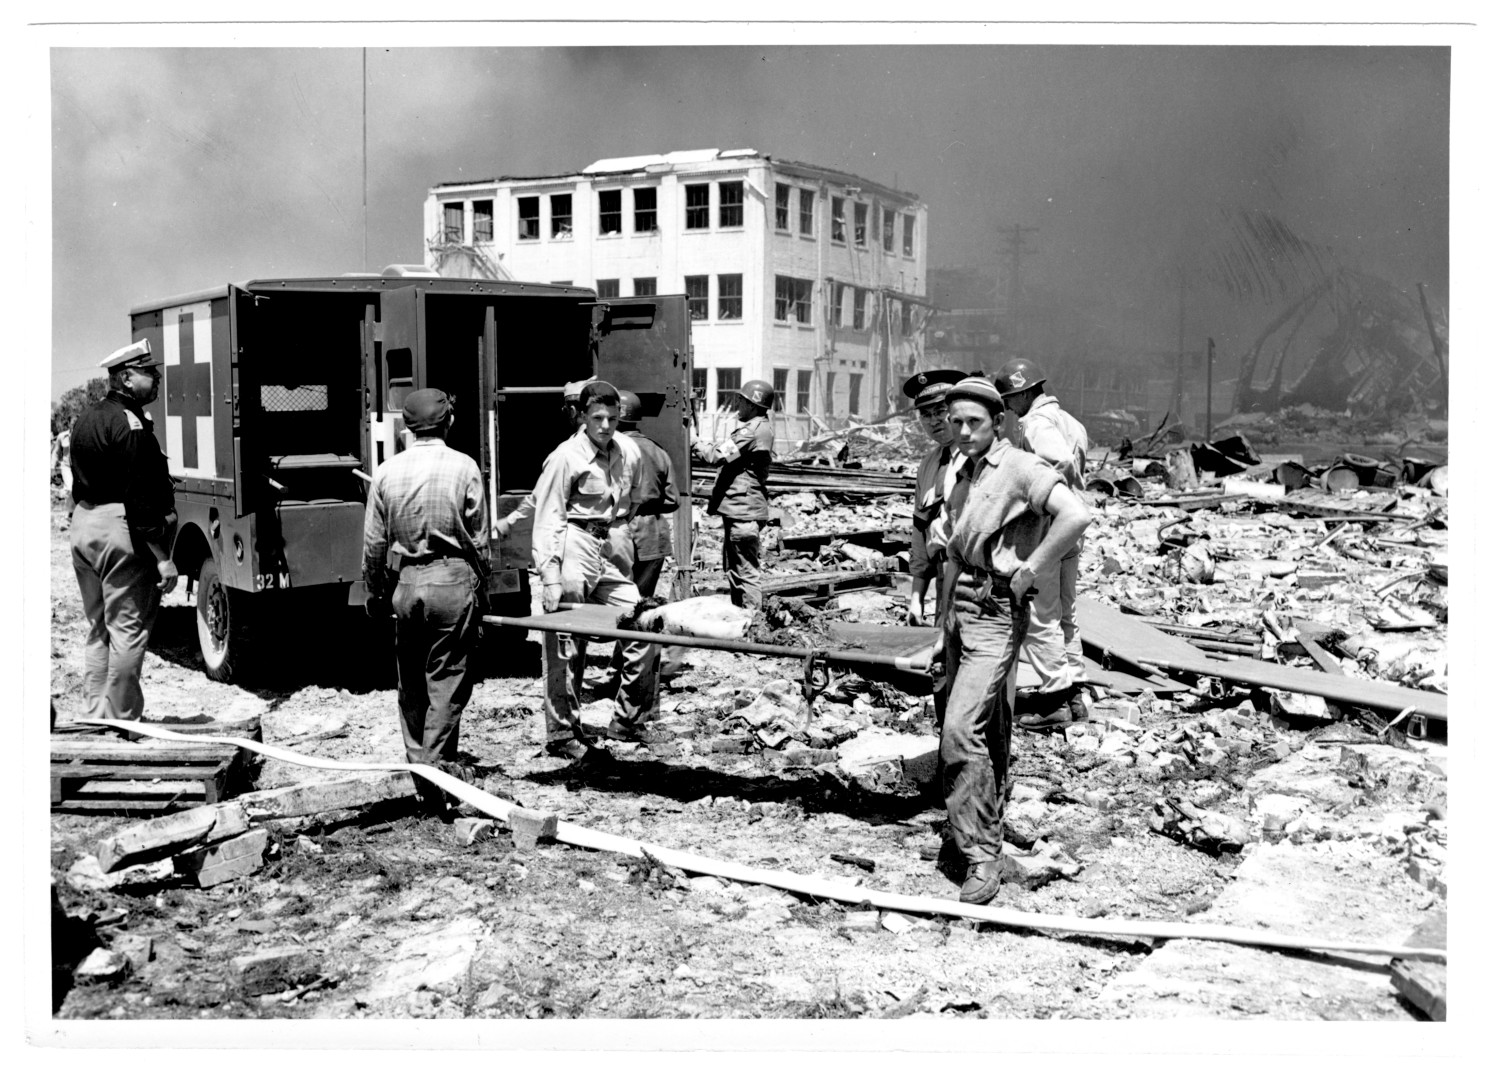 [Rescue workers holding a stretcher near an ambulance after the 1947 Texas City ...